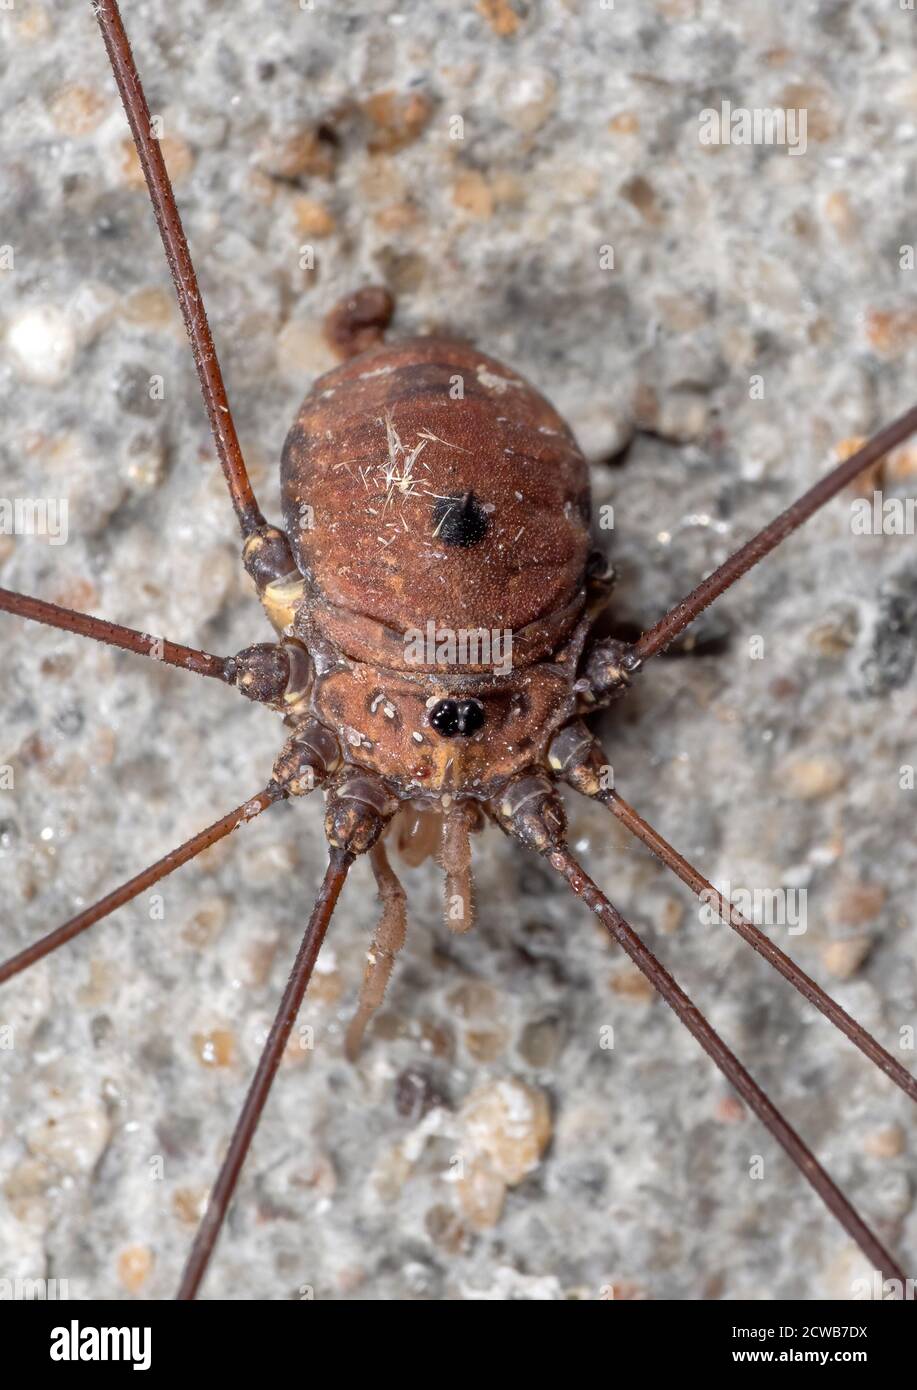 Macro Photography of Harvestman or Daddy Longlegs on The Wall Stock Photo